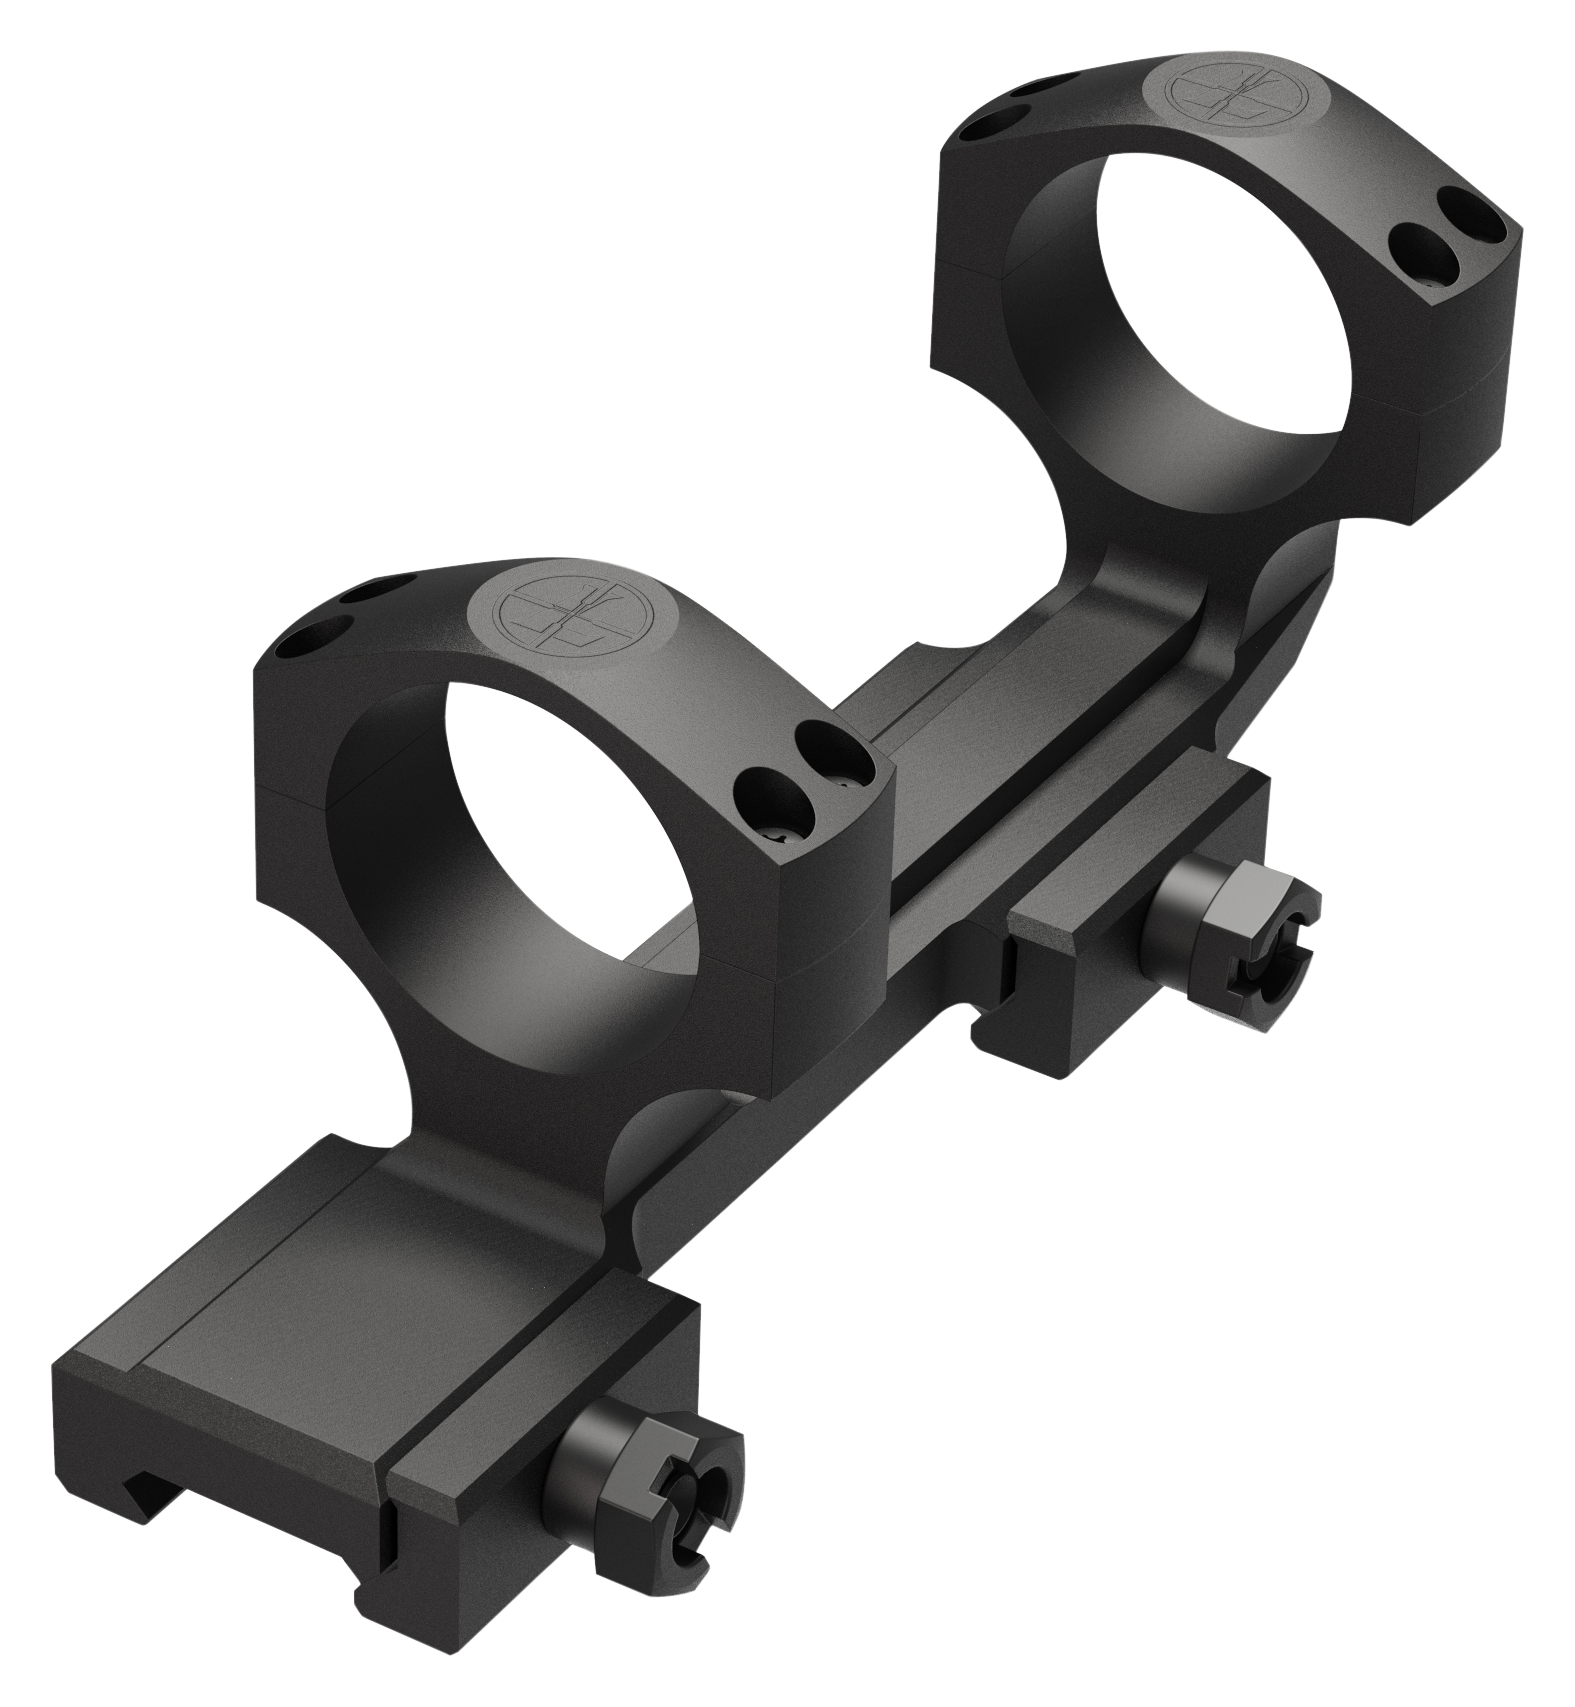 Leupold Mark IMS Integrated Mounting System - 35mm Tube